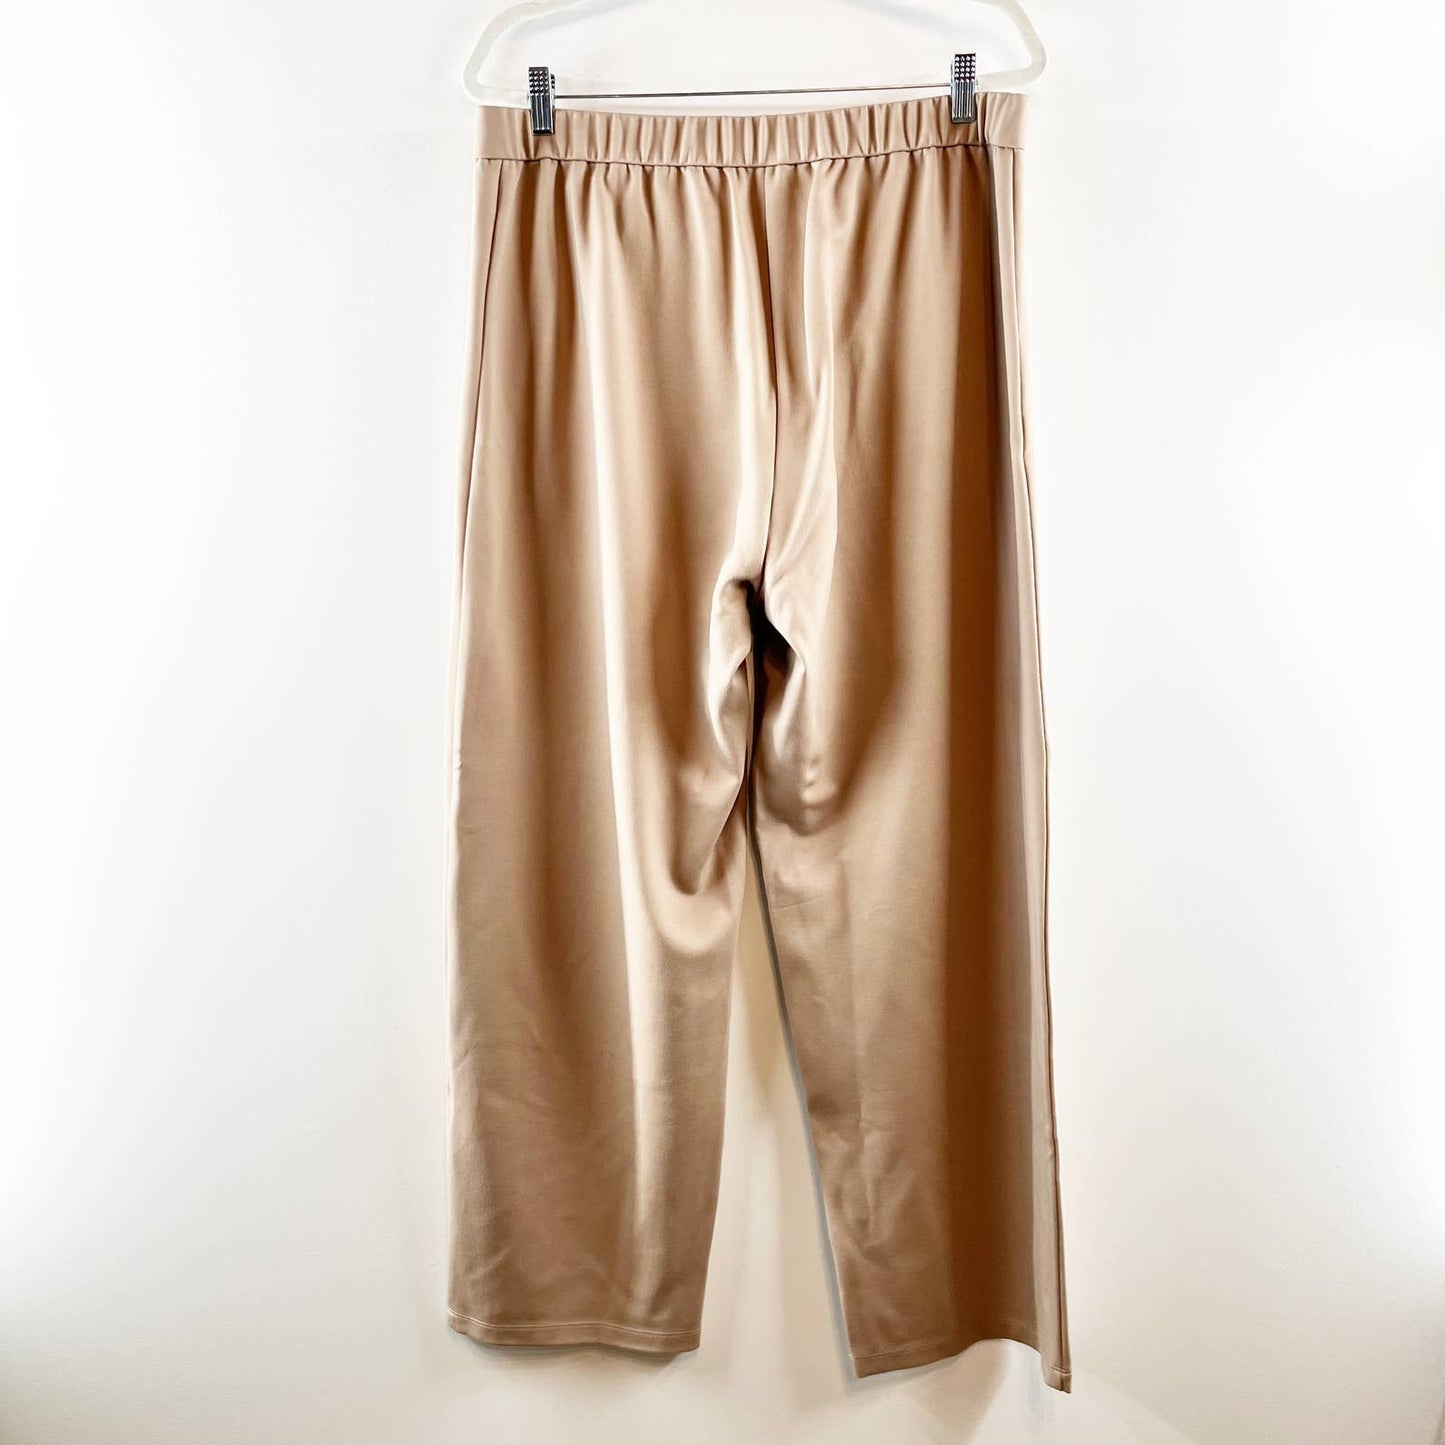 Eileen Fisher Flex Tencel Pull On High Waisted Ponte Straight Pants Beige Large